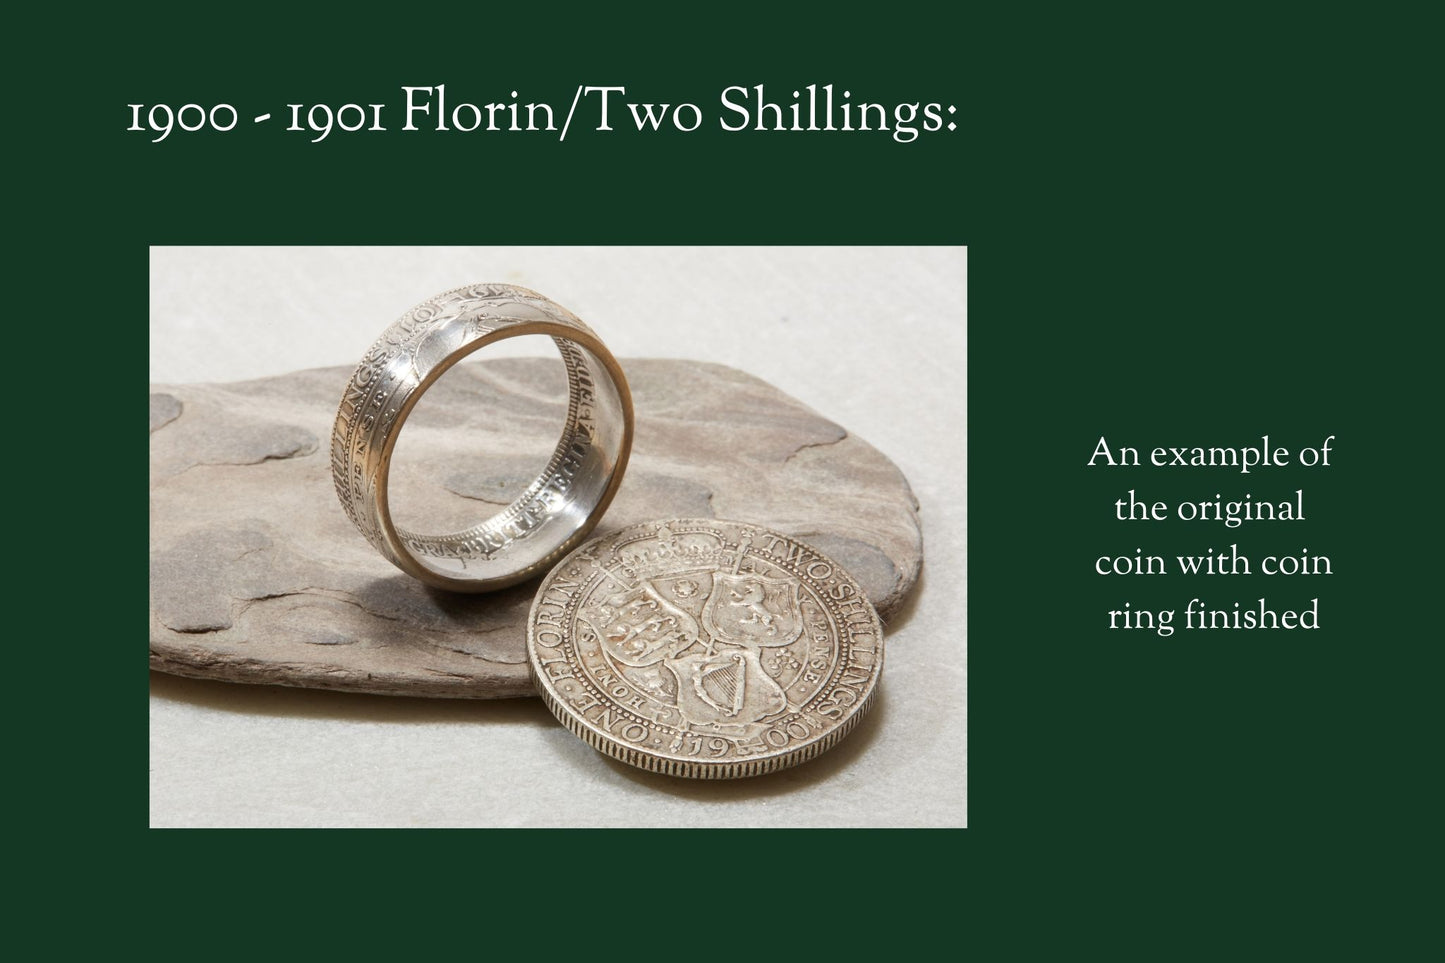 1900-1901 florin coin ring on stone with coin